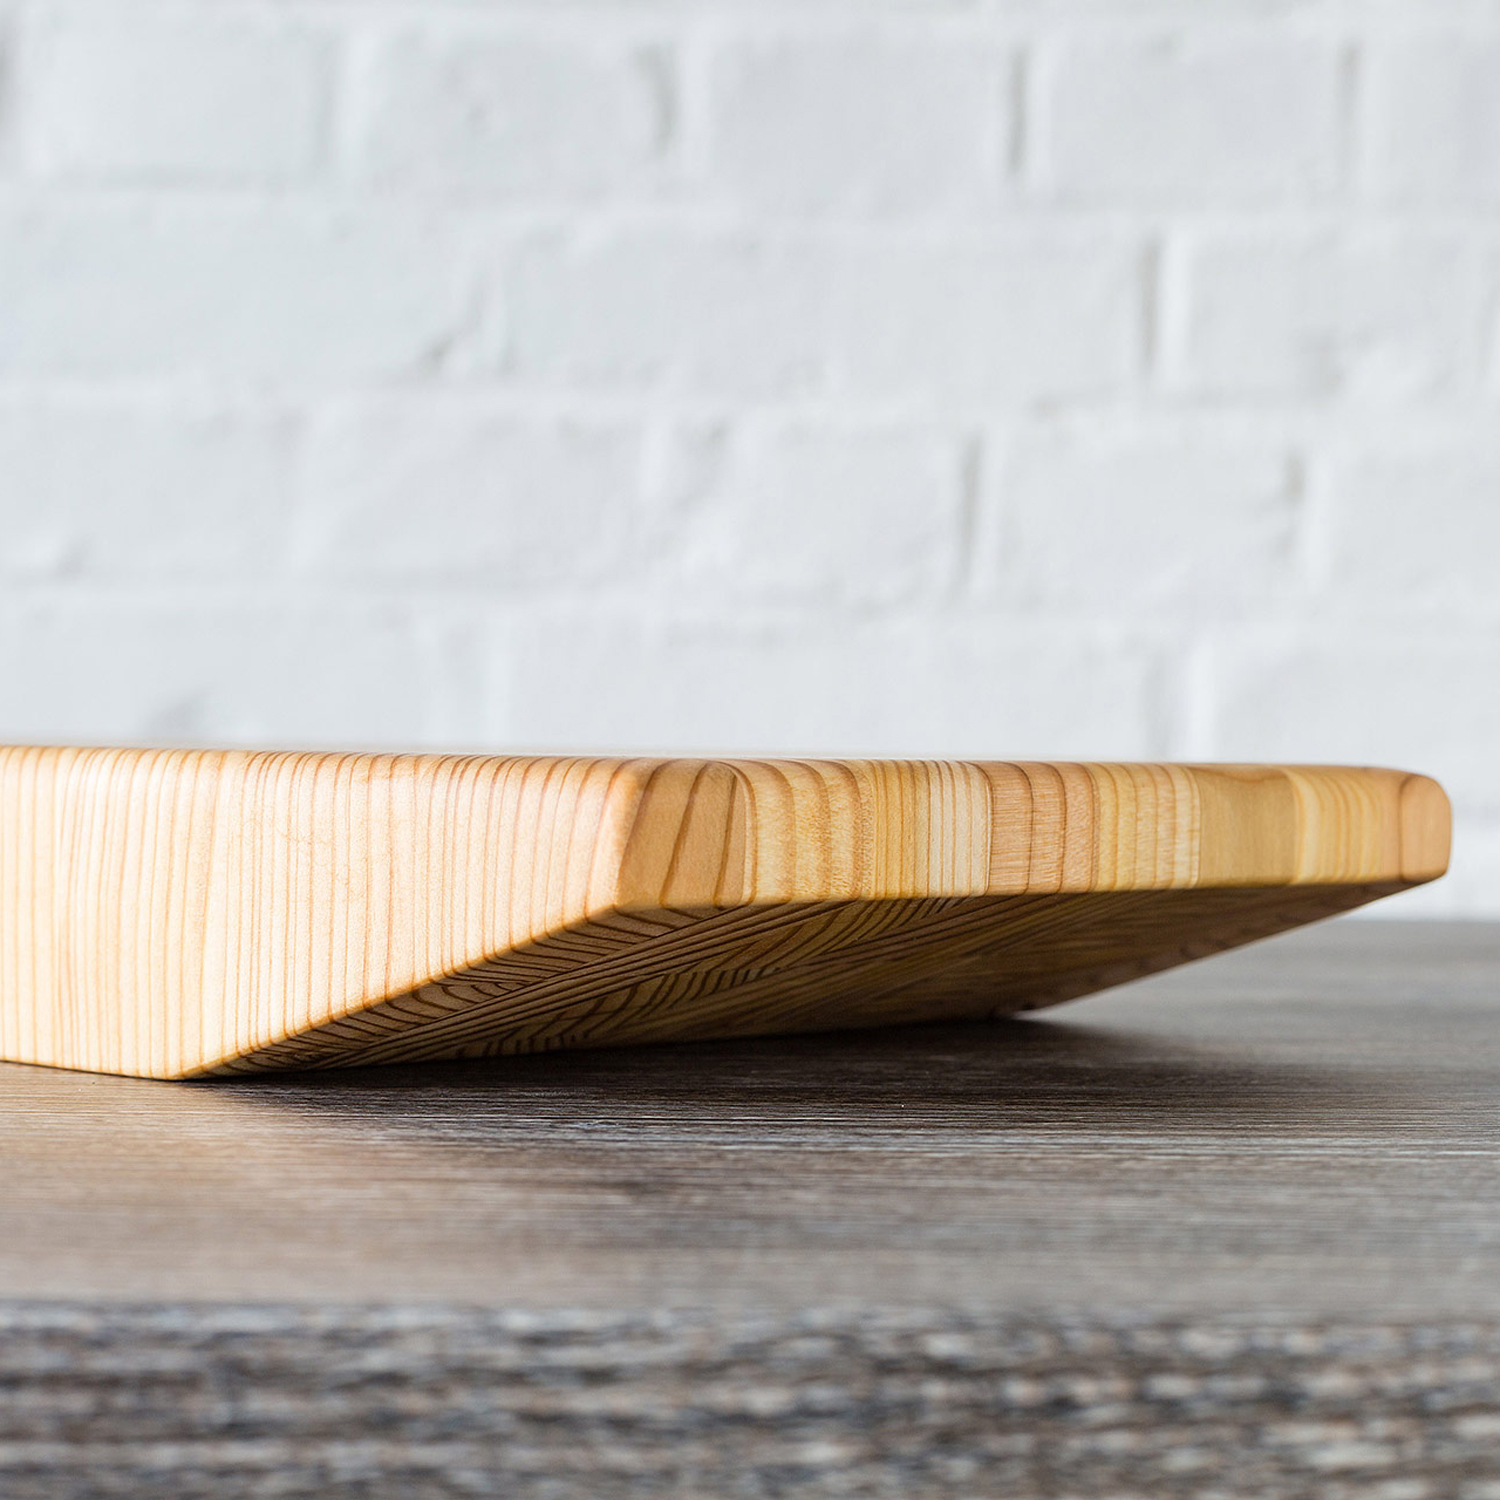 Larch Wood: Ki Small Serving Board Product Image 2 of 5